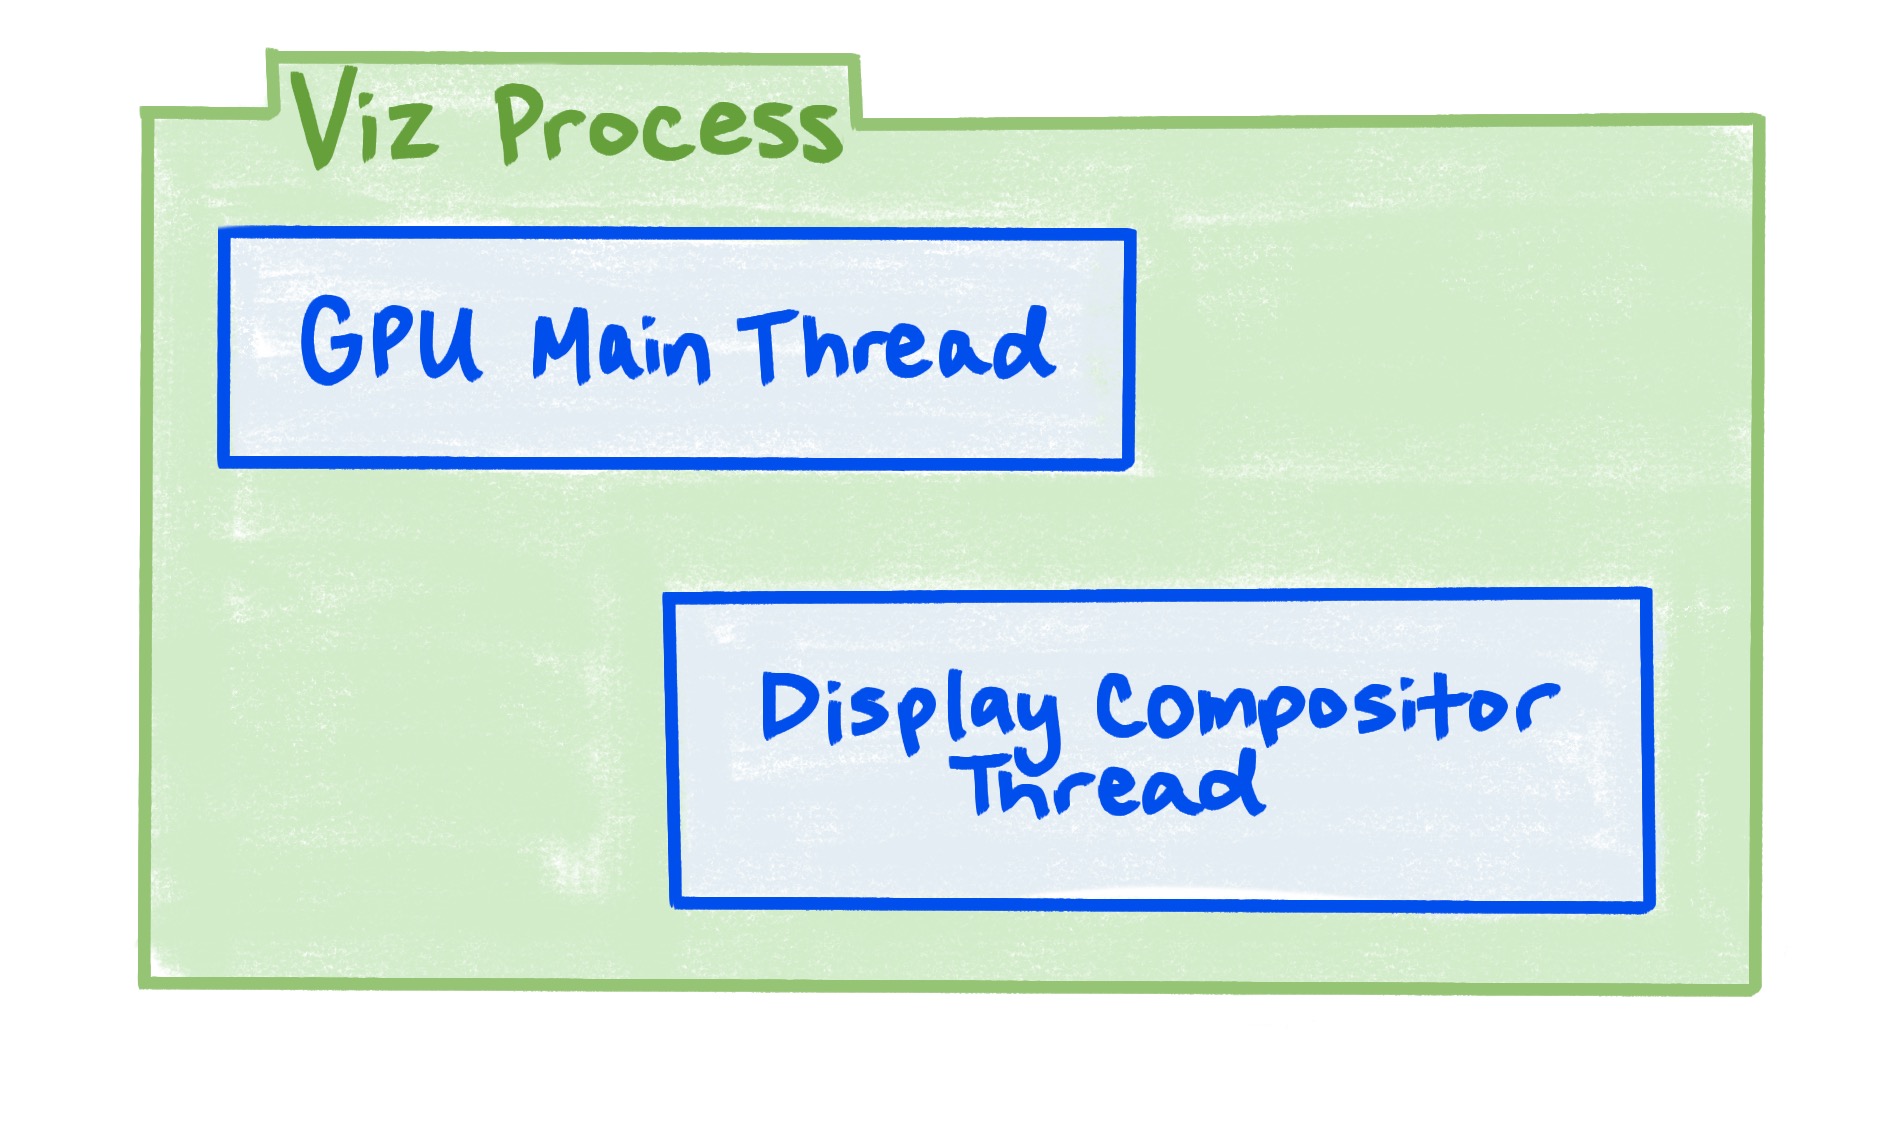 A diagram showing that the Viz process includes the GPU main thread, and the display compositor thread.